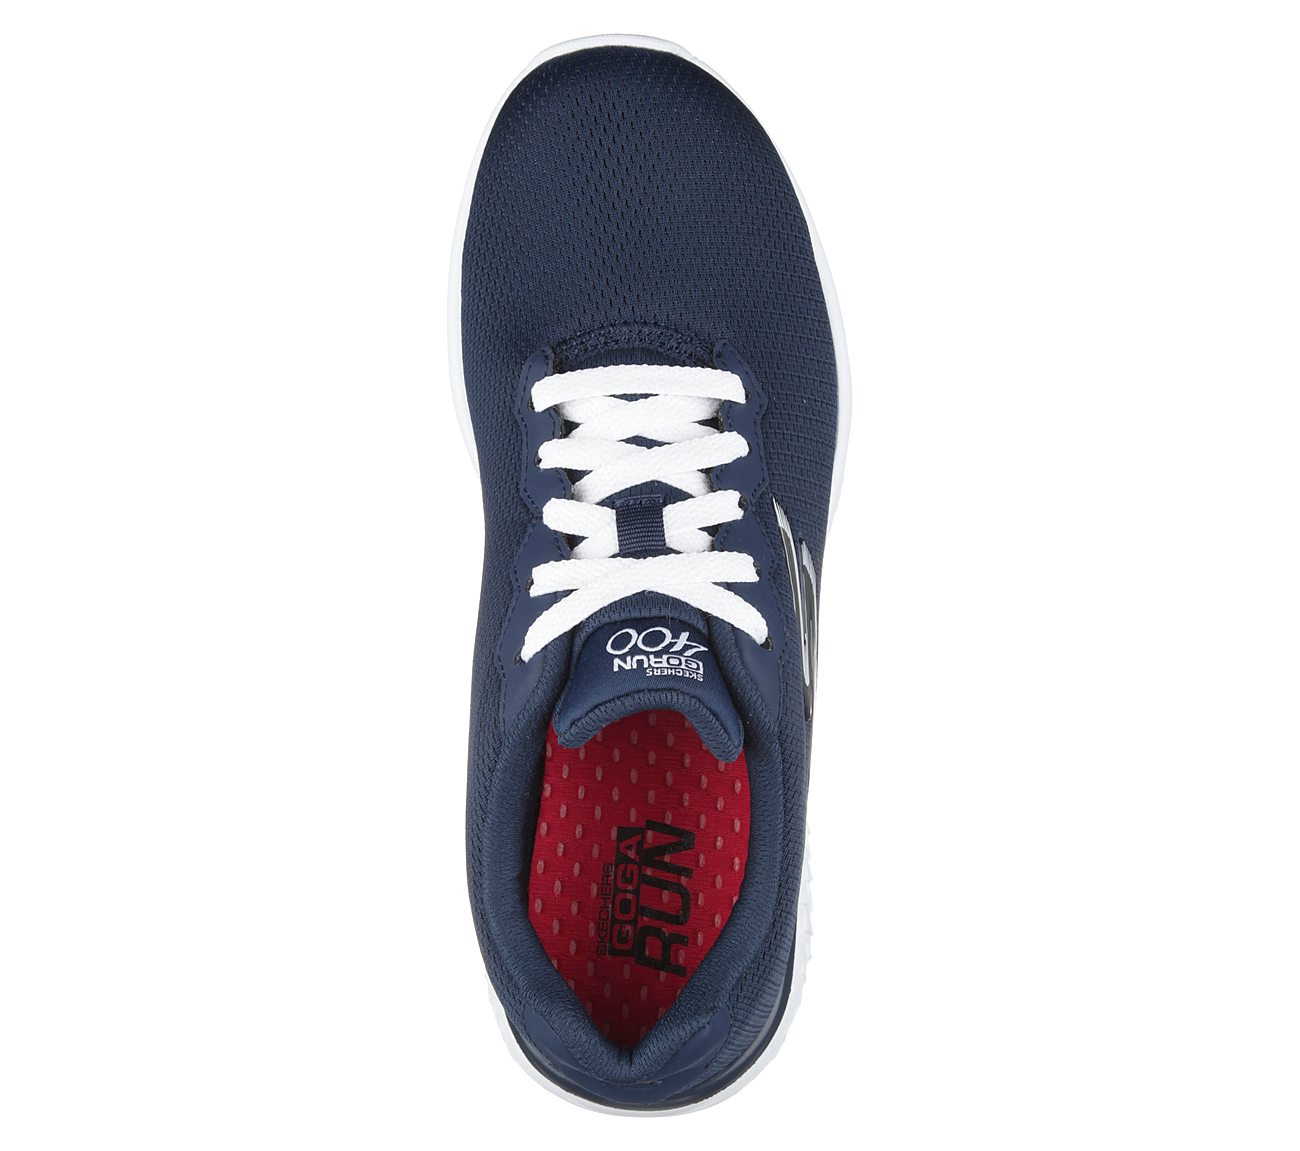 GO RUN 400 - ACTION, NAVY/WHITE Footwear Top View